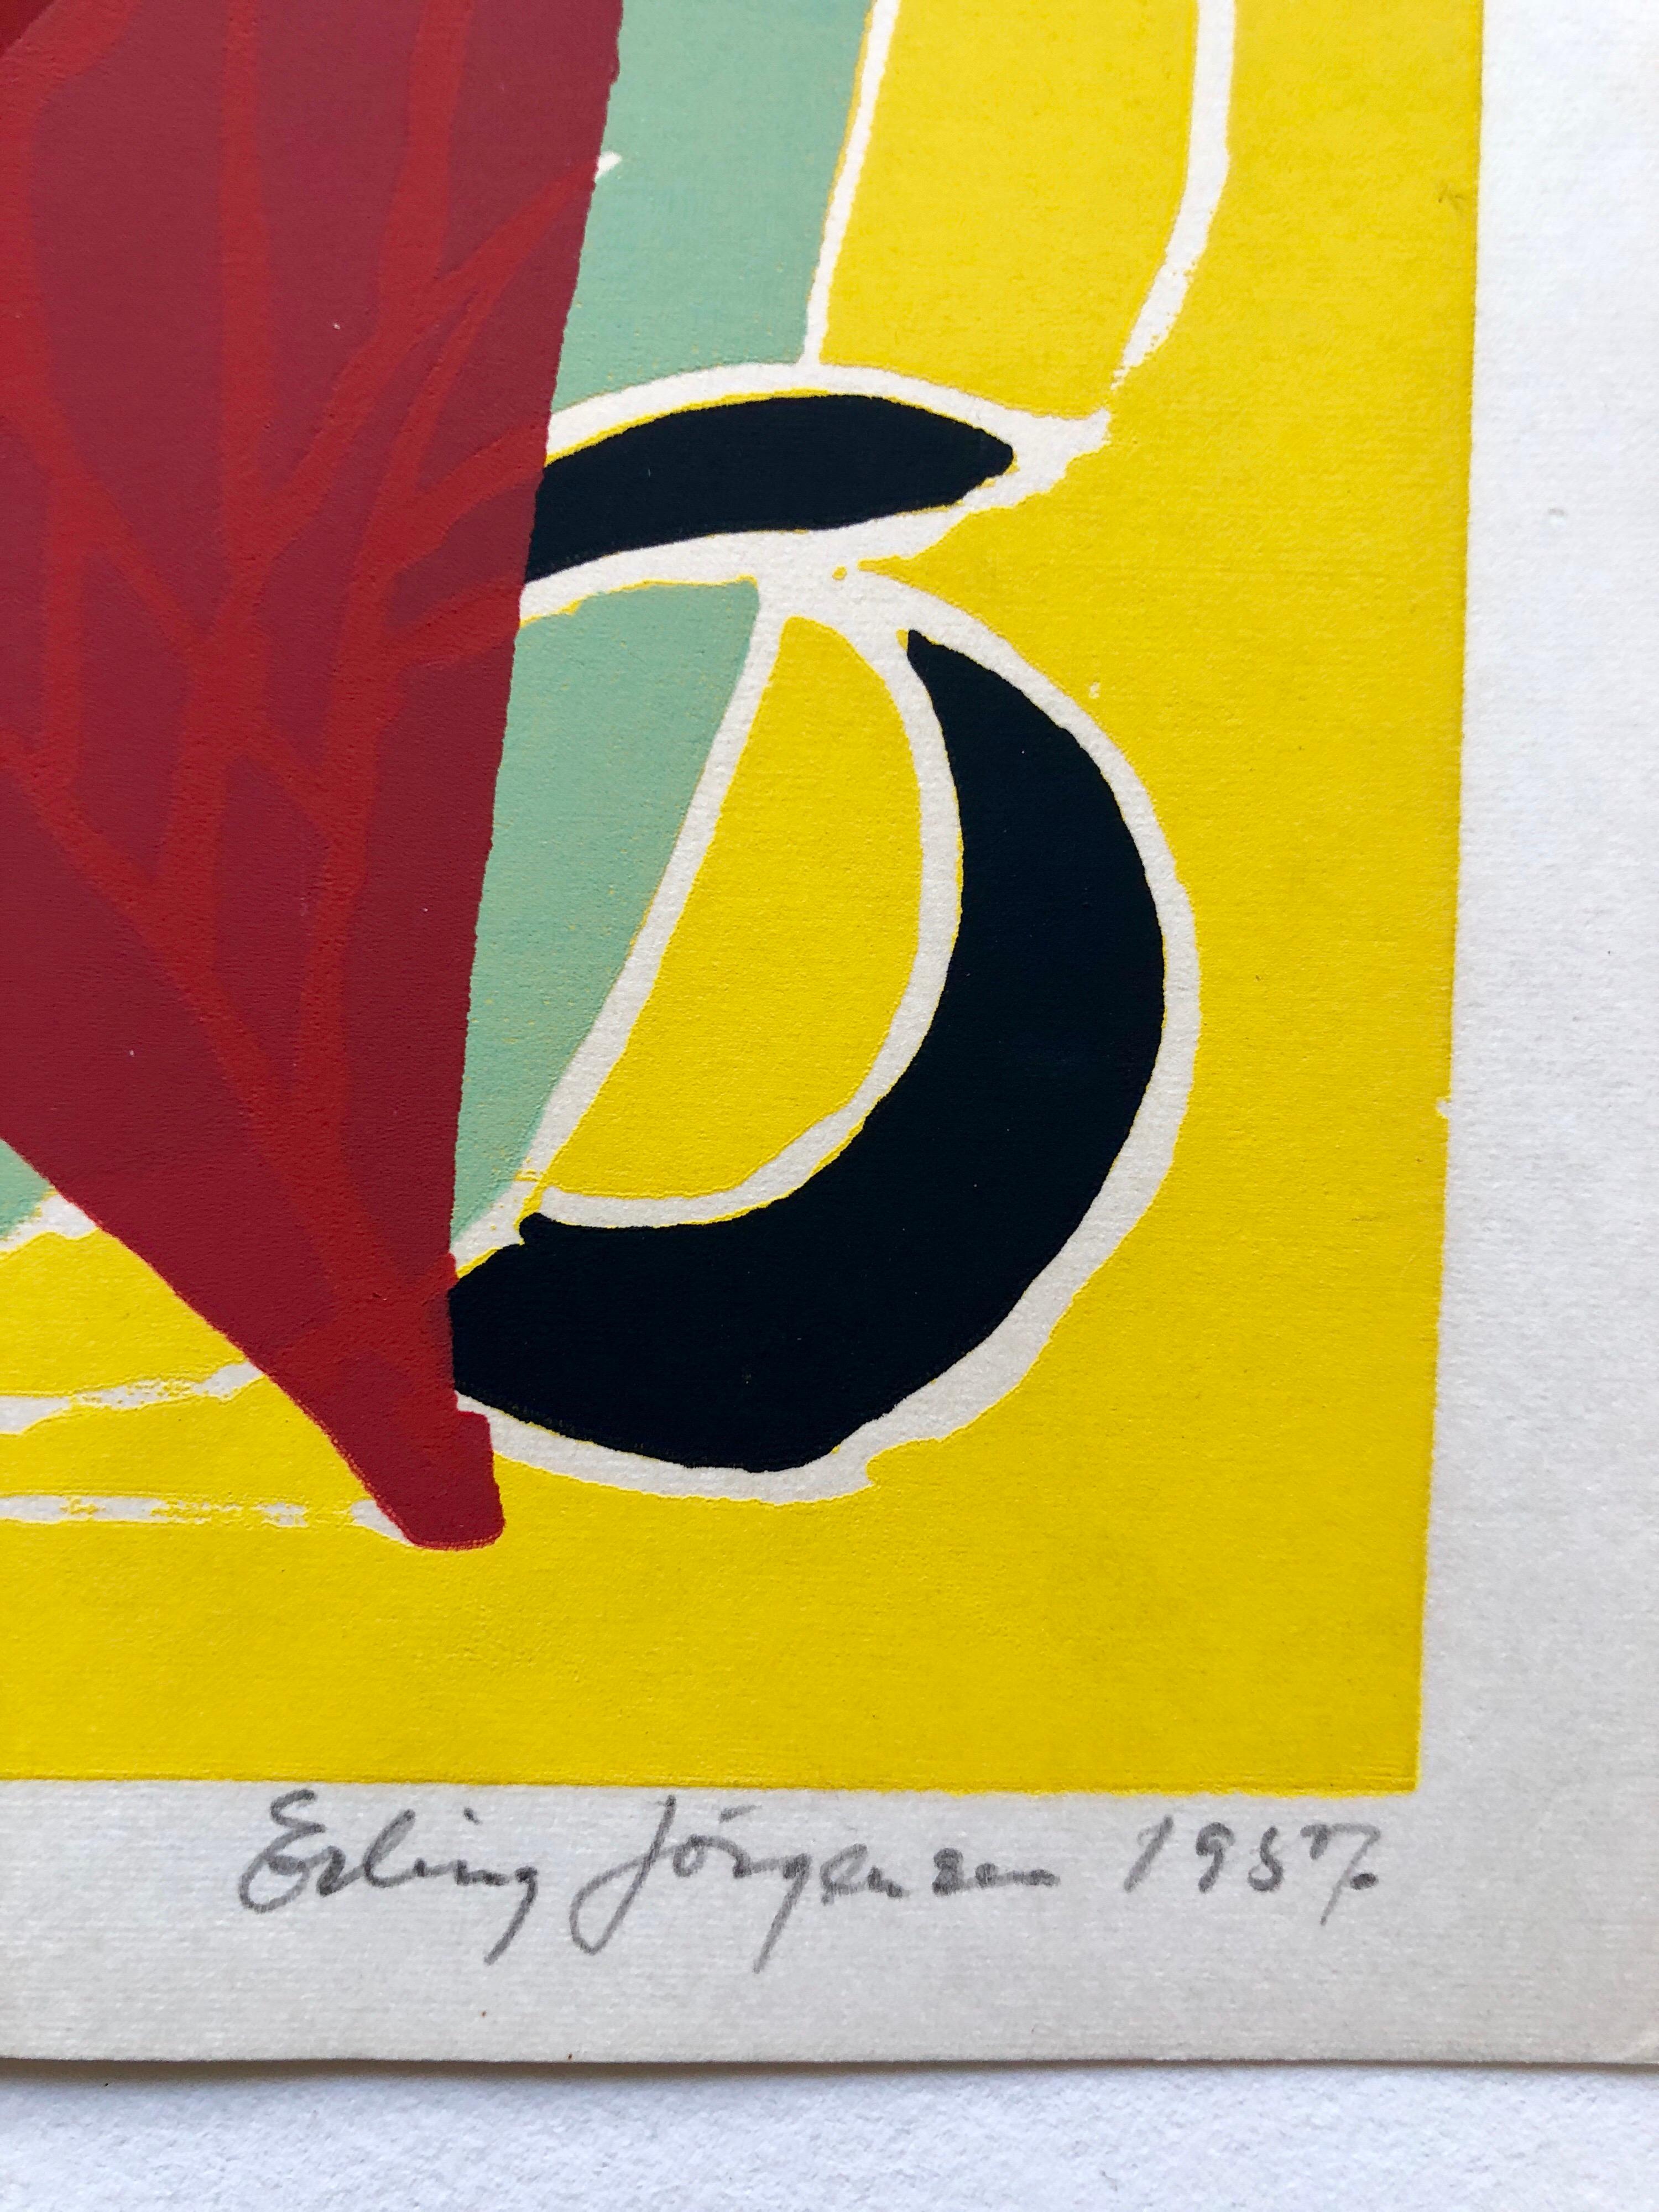 Cobra Artist 1950s Silkscreen Serigraph Bright Colorful Abstract Hand Signed - Print by Erling Jorgensen